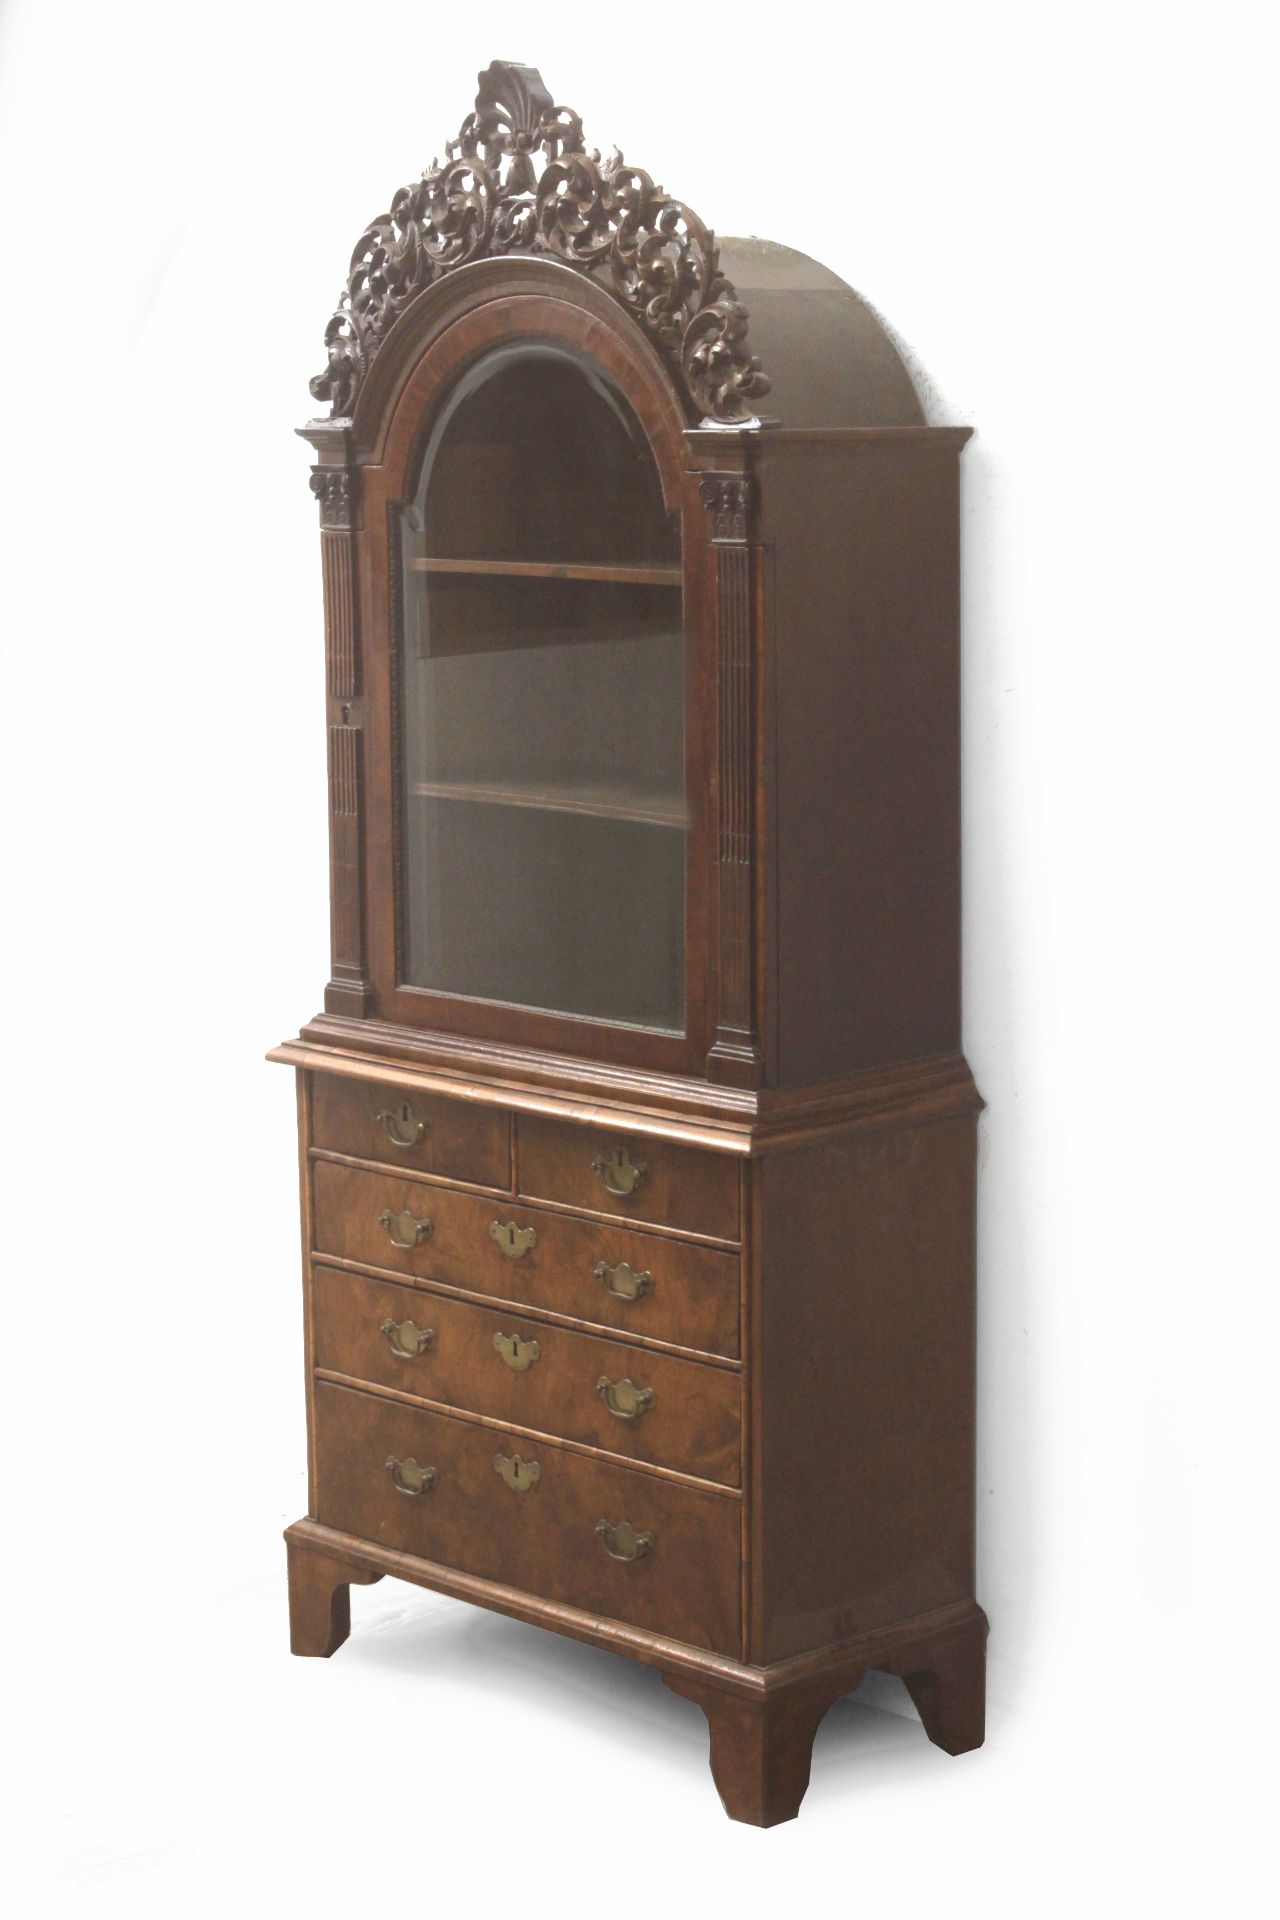 An 18th century Dutch mahogany glass cabinet - Image 2 of 5